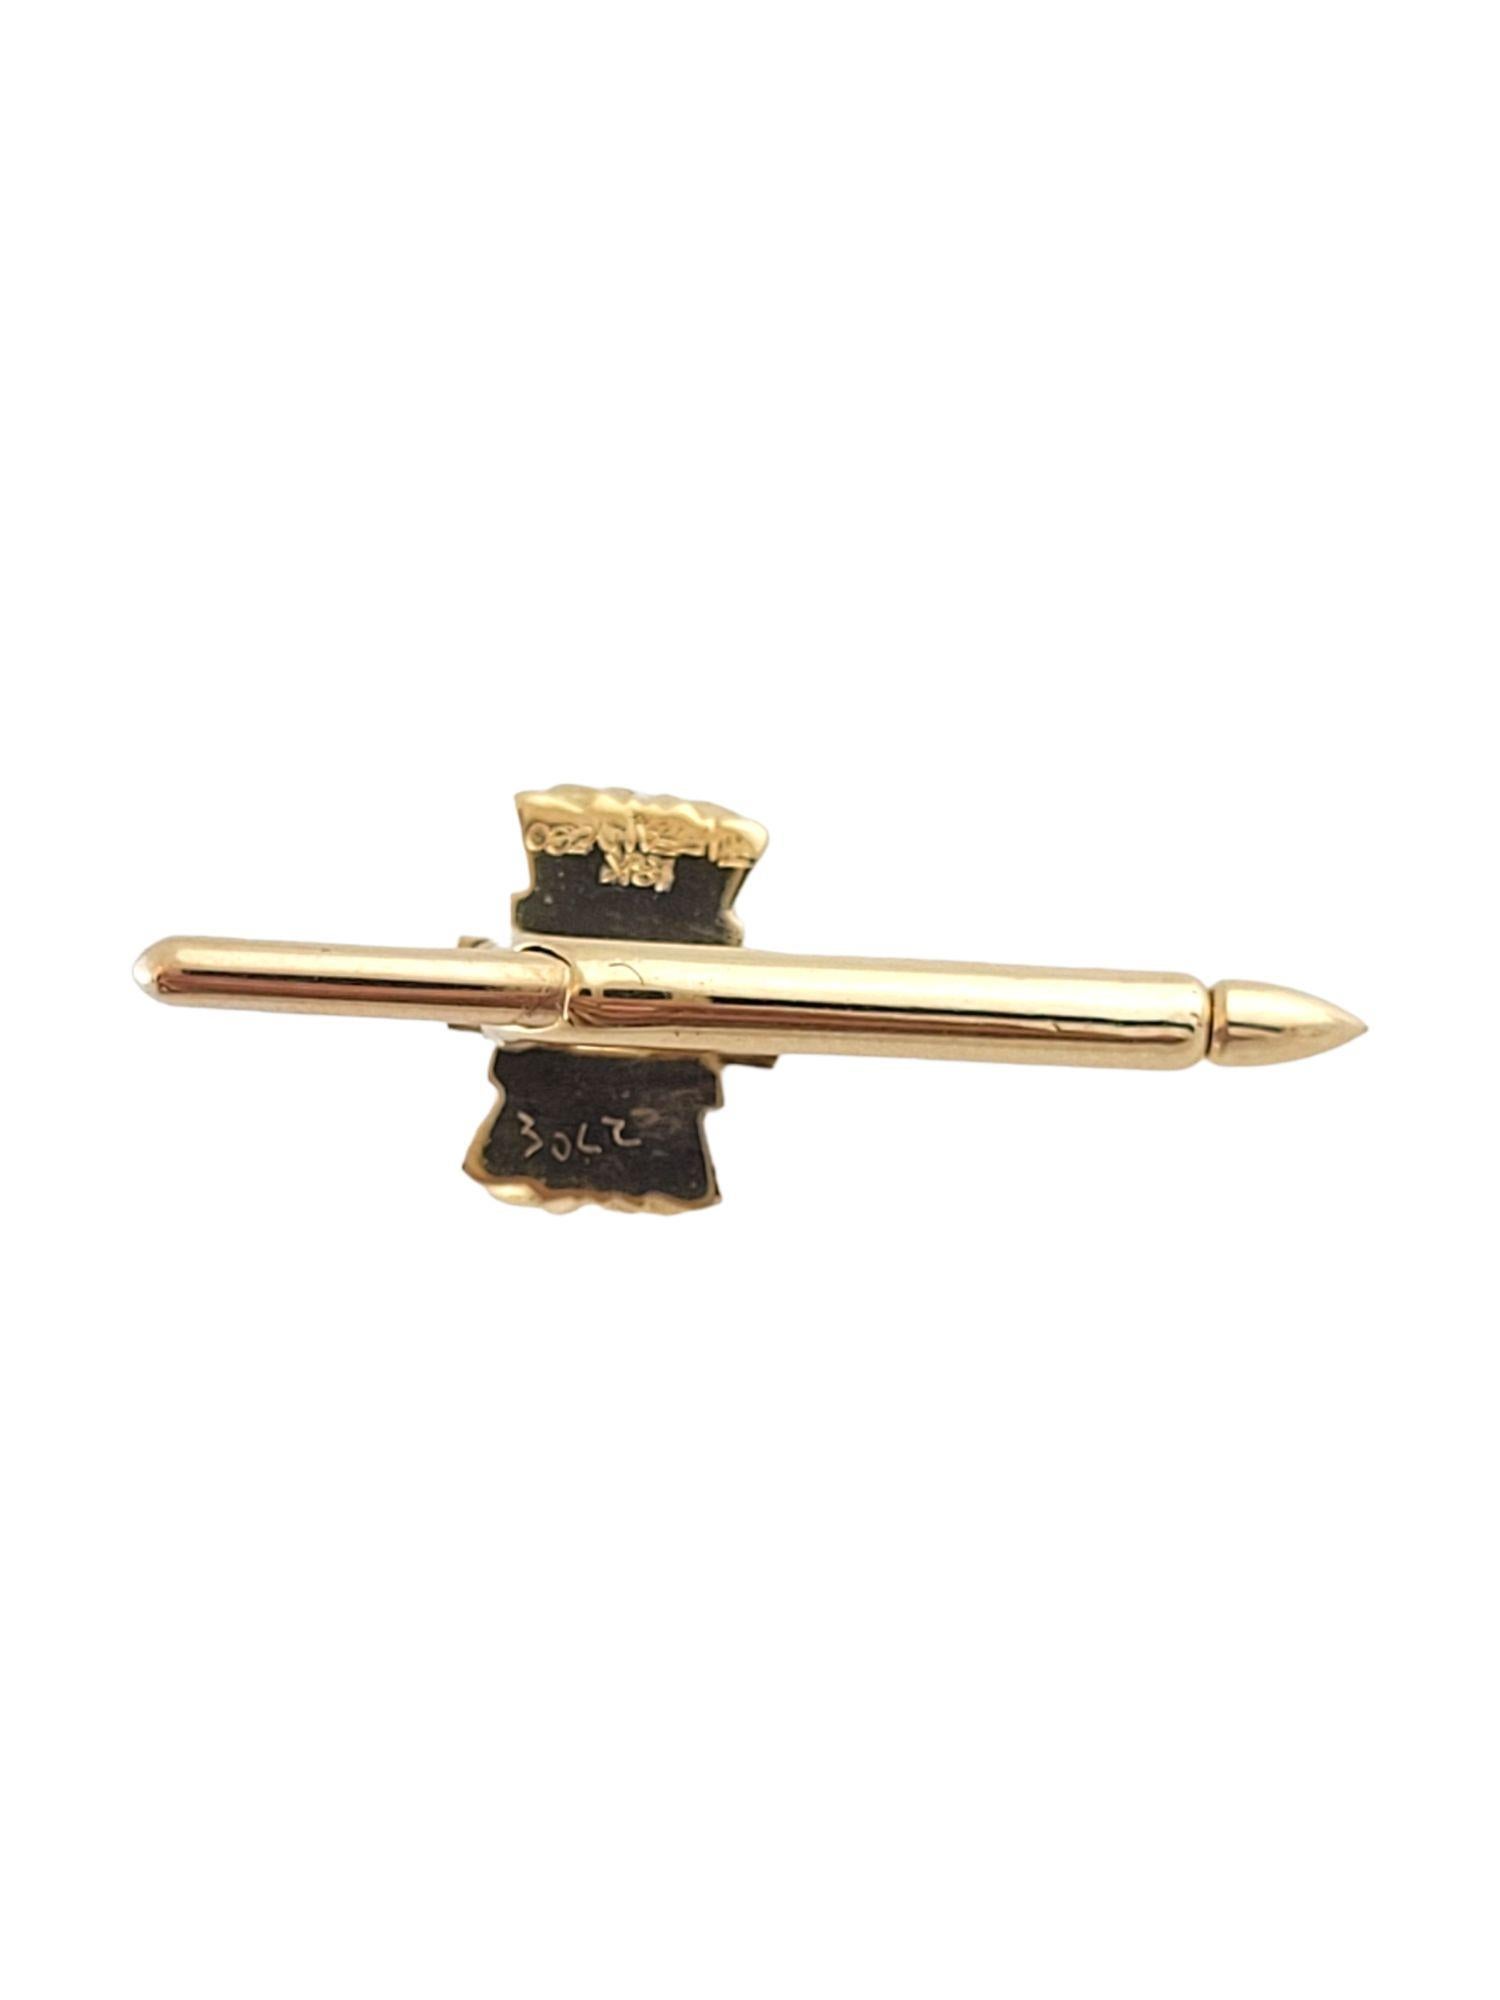 Tiffany & Co 18K Yellow Gold & Sapphire Cufflink and Stud Set #14812 For Sale 3